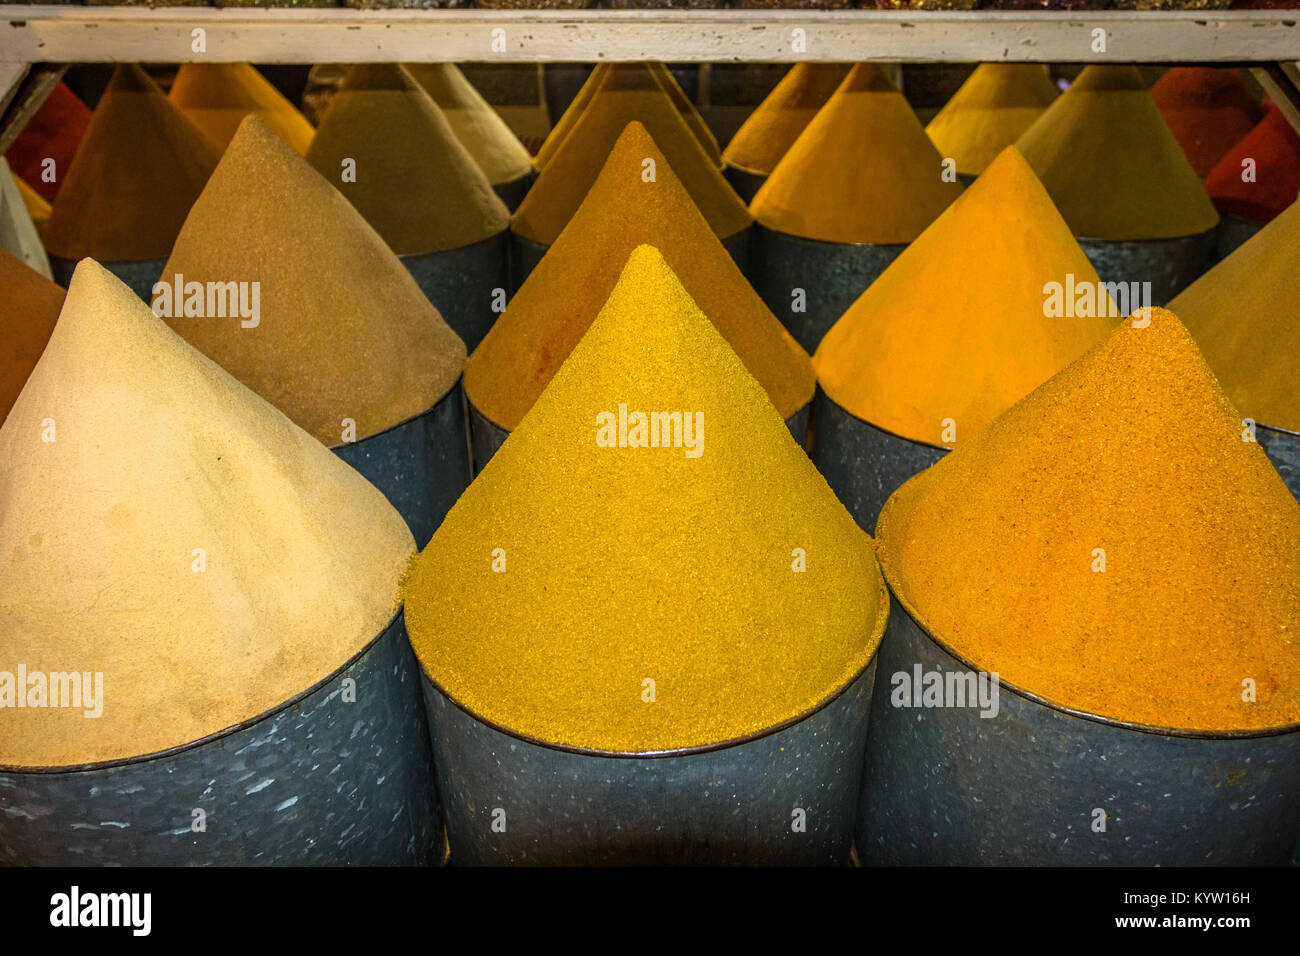 Cones of spices on display for sale in the souk of the ancient Medina in Marrakesh, Morocco Stock Photo